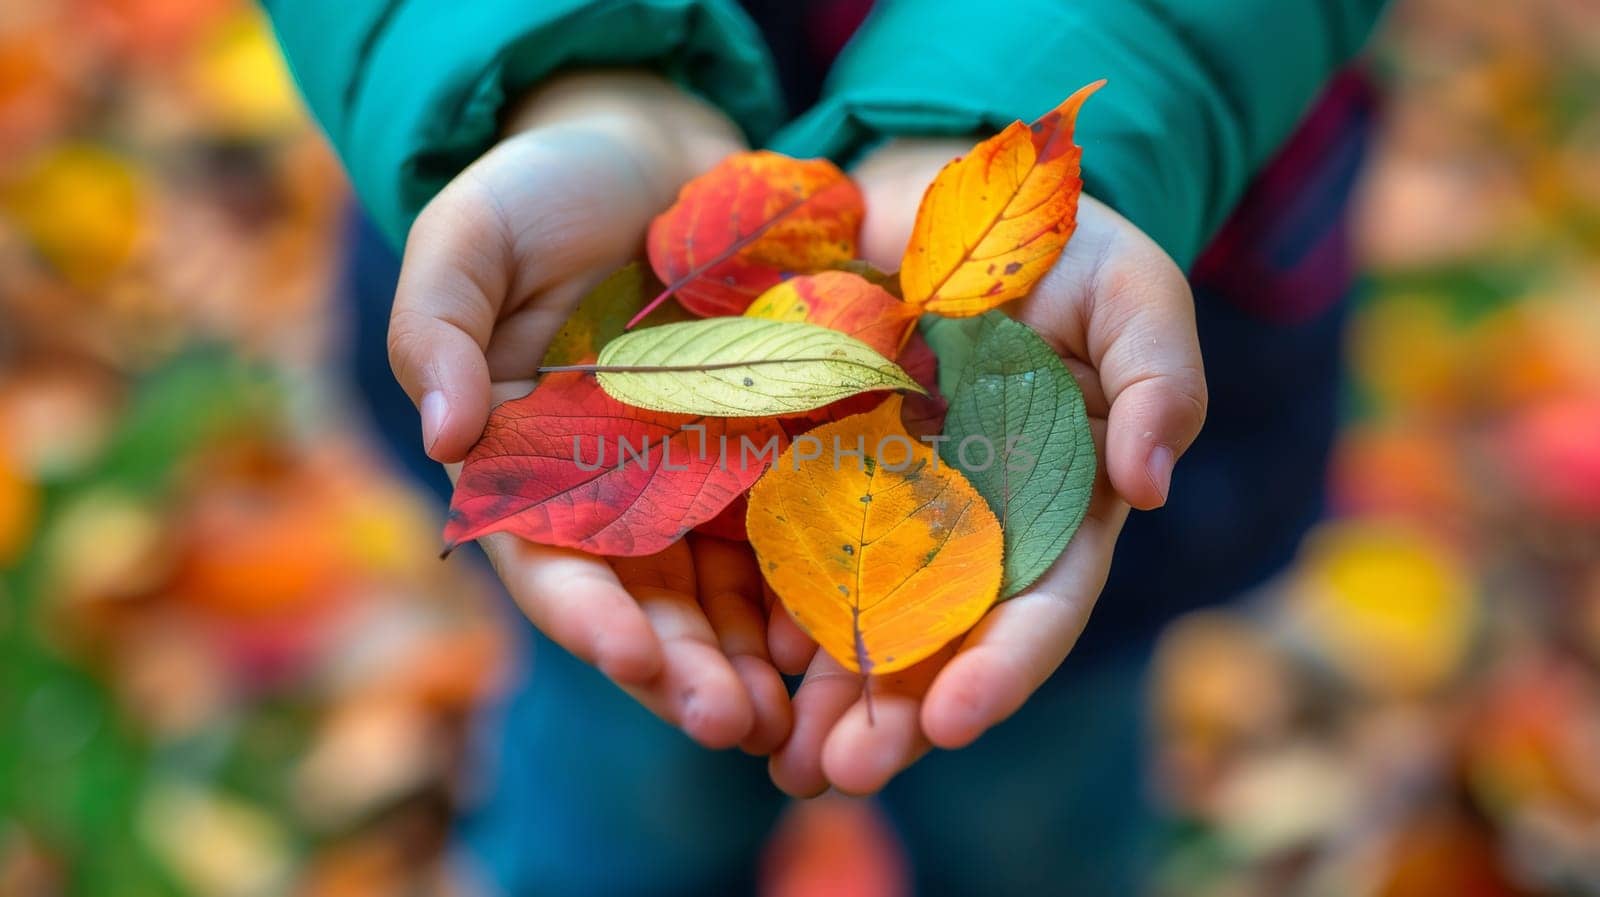 A person holding a handful of colorful leaves in their hands